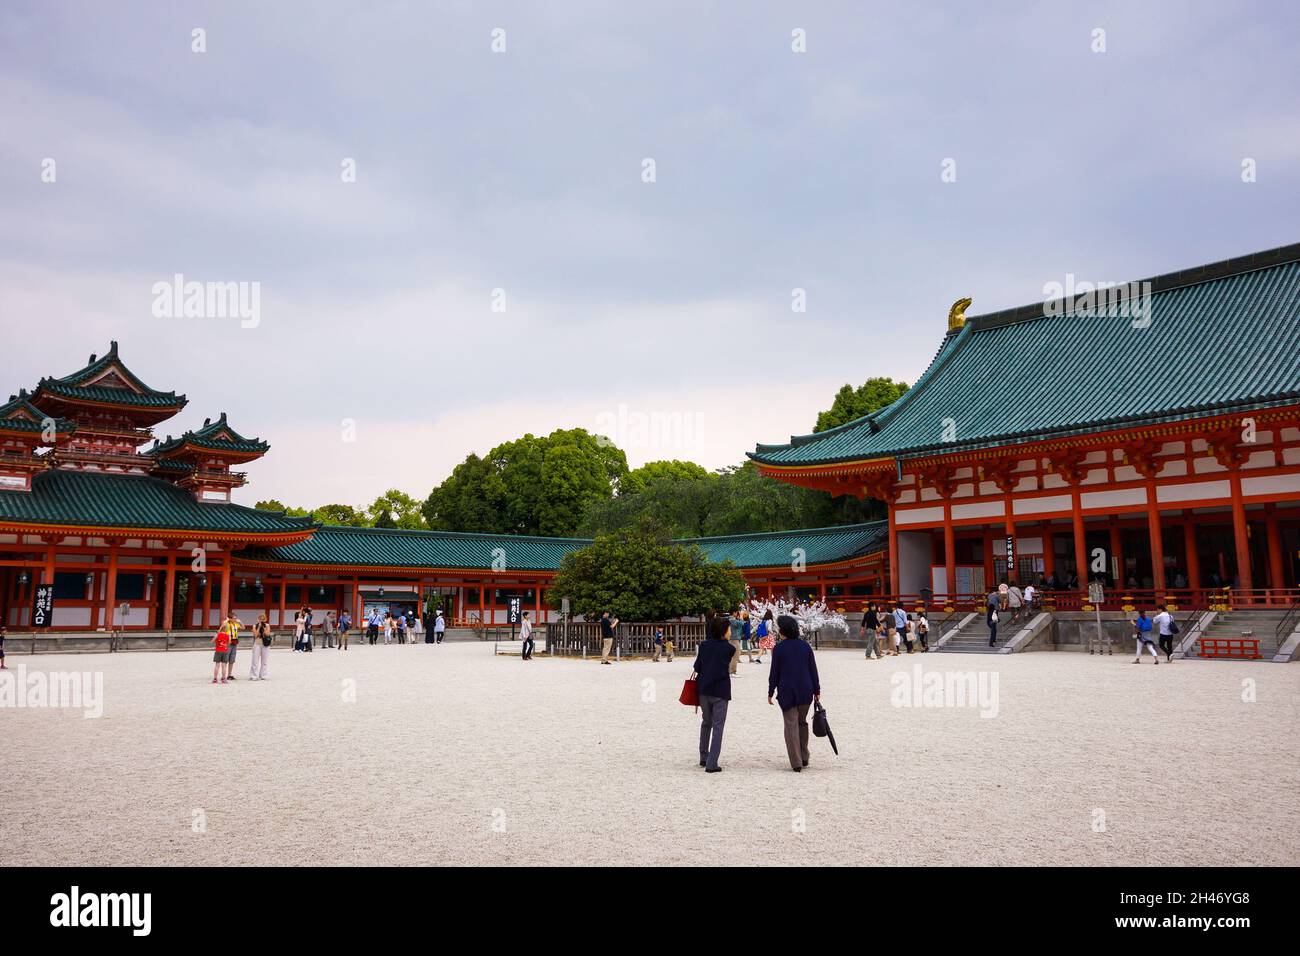 View of the inner courtyard of Heian Shrine with crowd of people walking. Main hall, Byakko-rou tower and cloudy sky background. Stock Photo